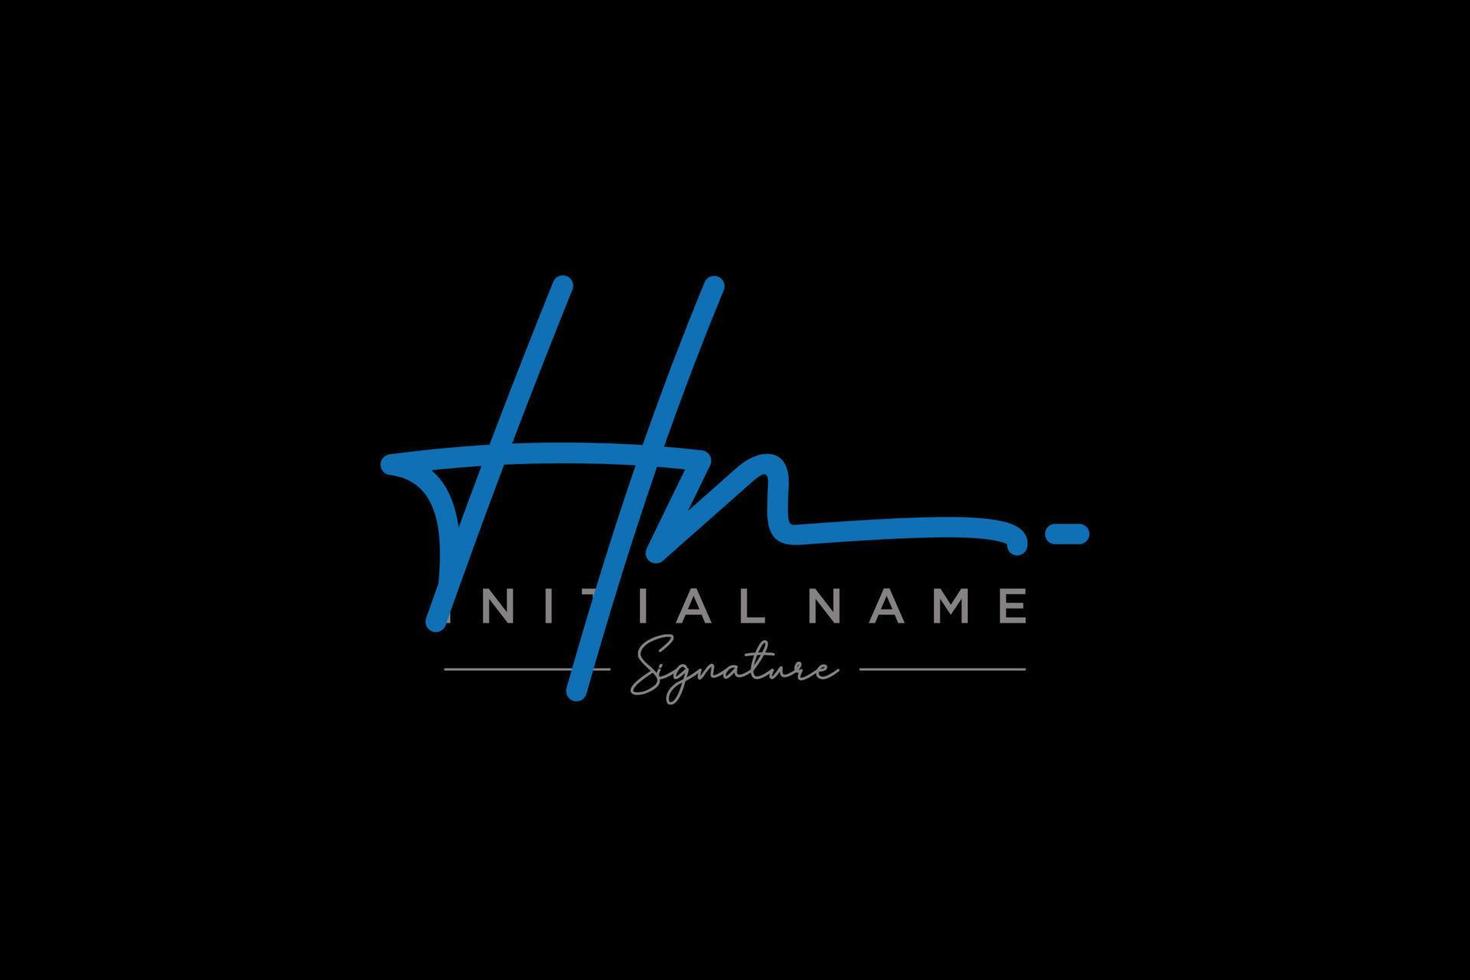 Initial HN signature logo template vector. Hand drawn Calligraphy lettering Vector illustration.